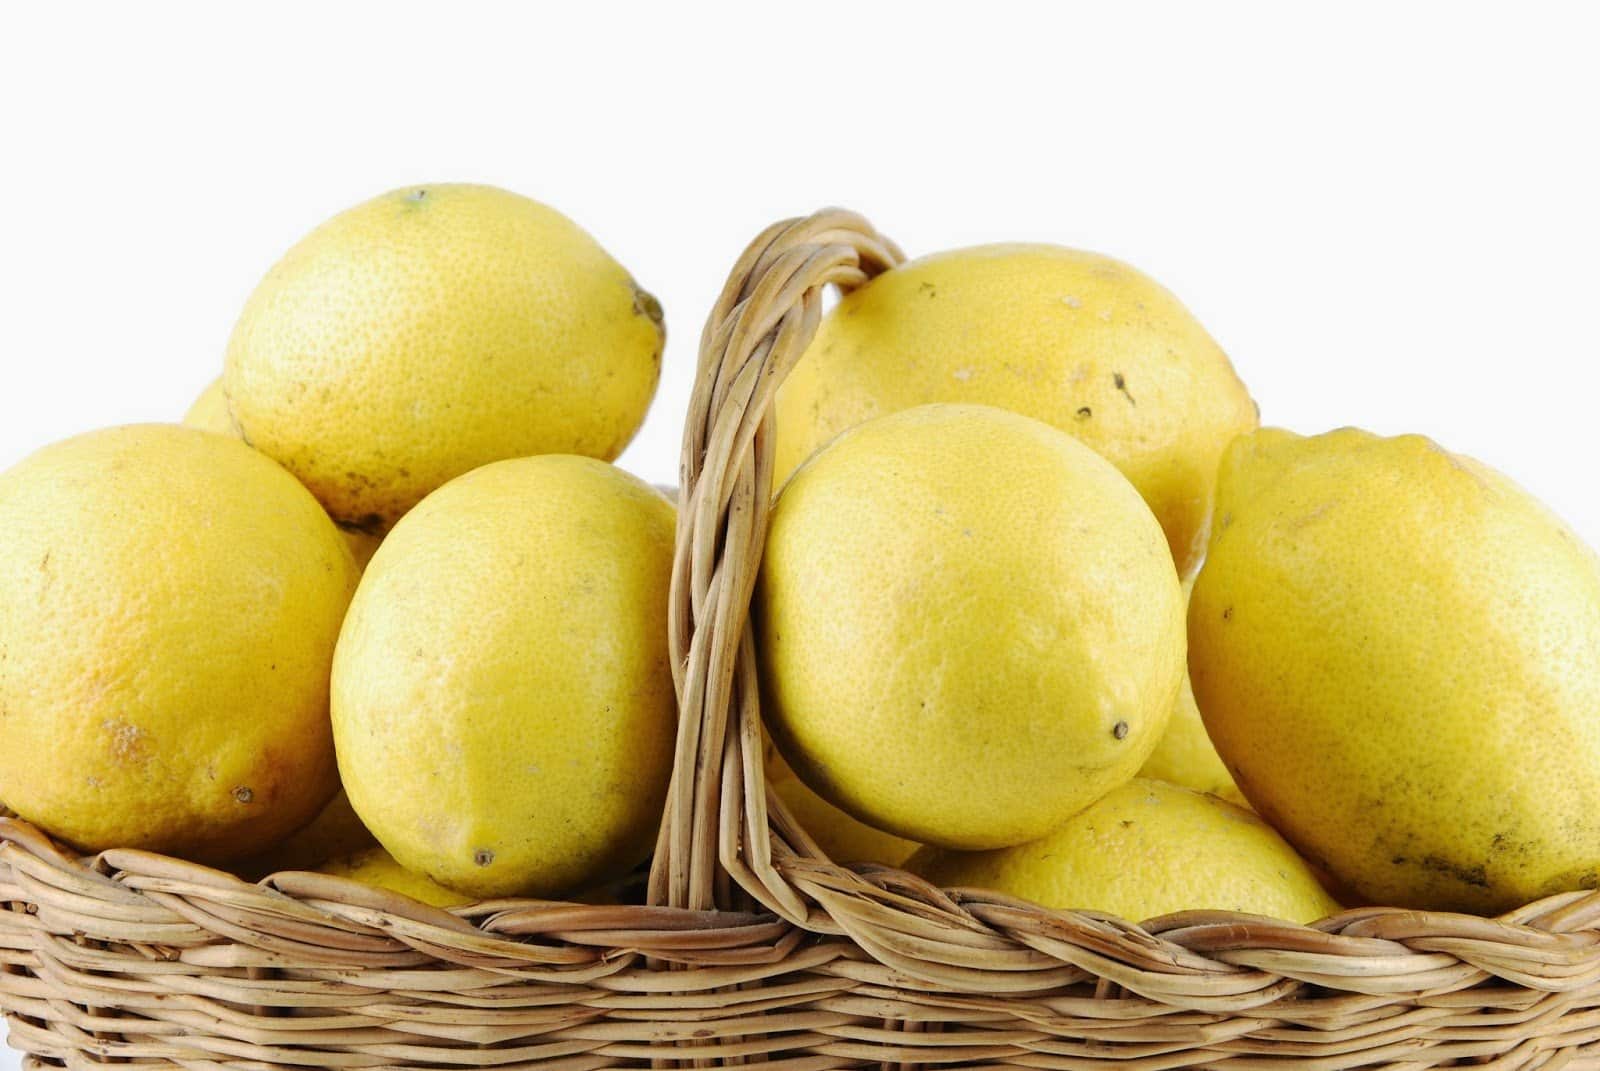 1786916 close up of lemons in a wicker basket on white 040214 900